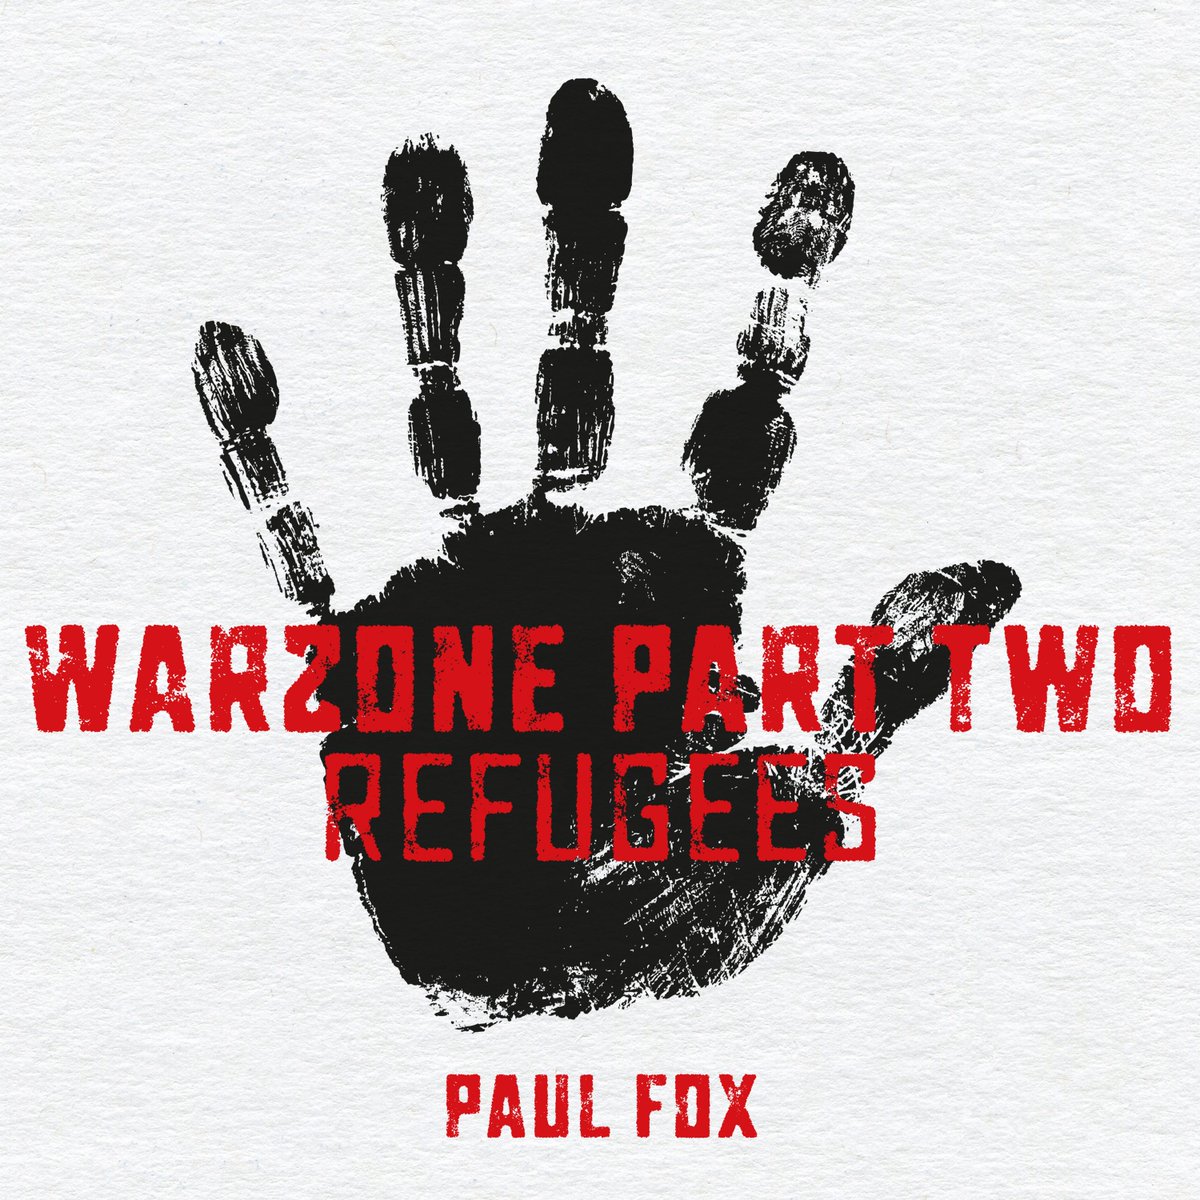 Two decades after he first highlighted the topic, the UK roots singer returns to the subject of war and displacement, asking us why nothing has changed…
reggaetastemaker.com/reggae/paul-fo…
@paulfoxmusic #reggaetastemaker #reggaenews #reggaemusic